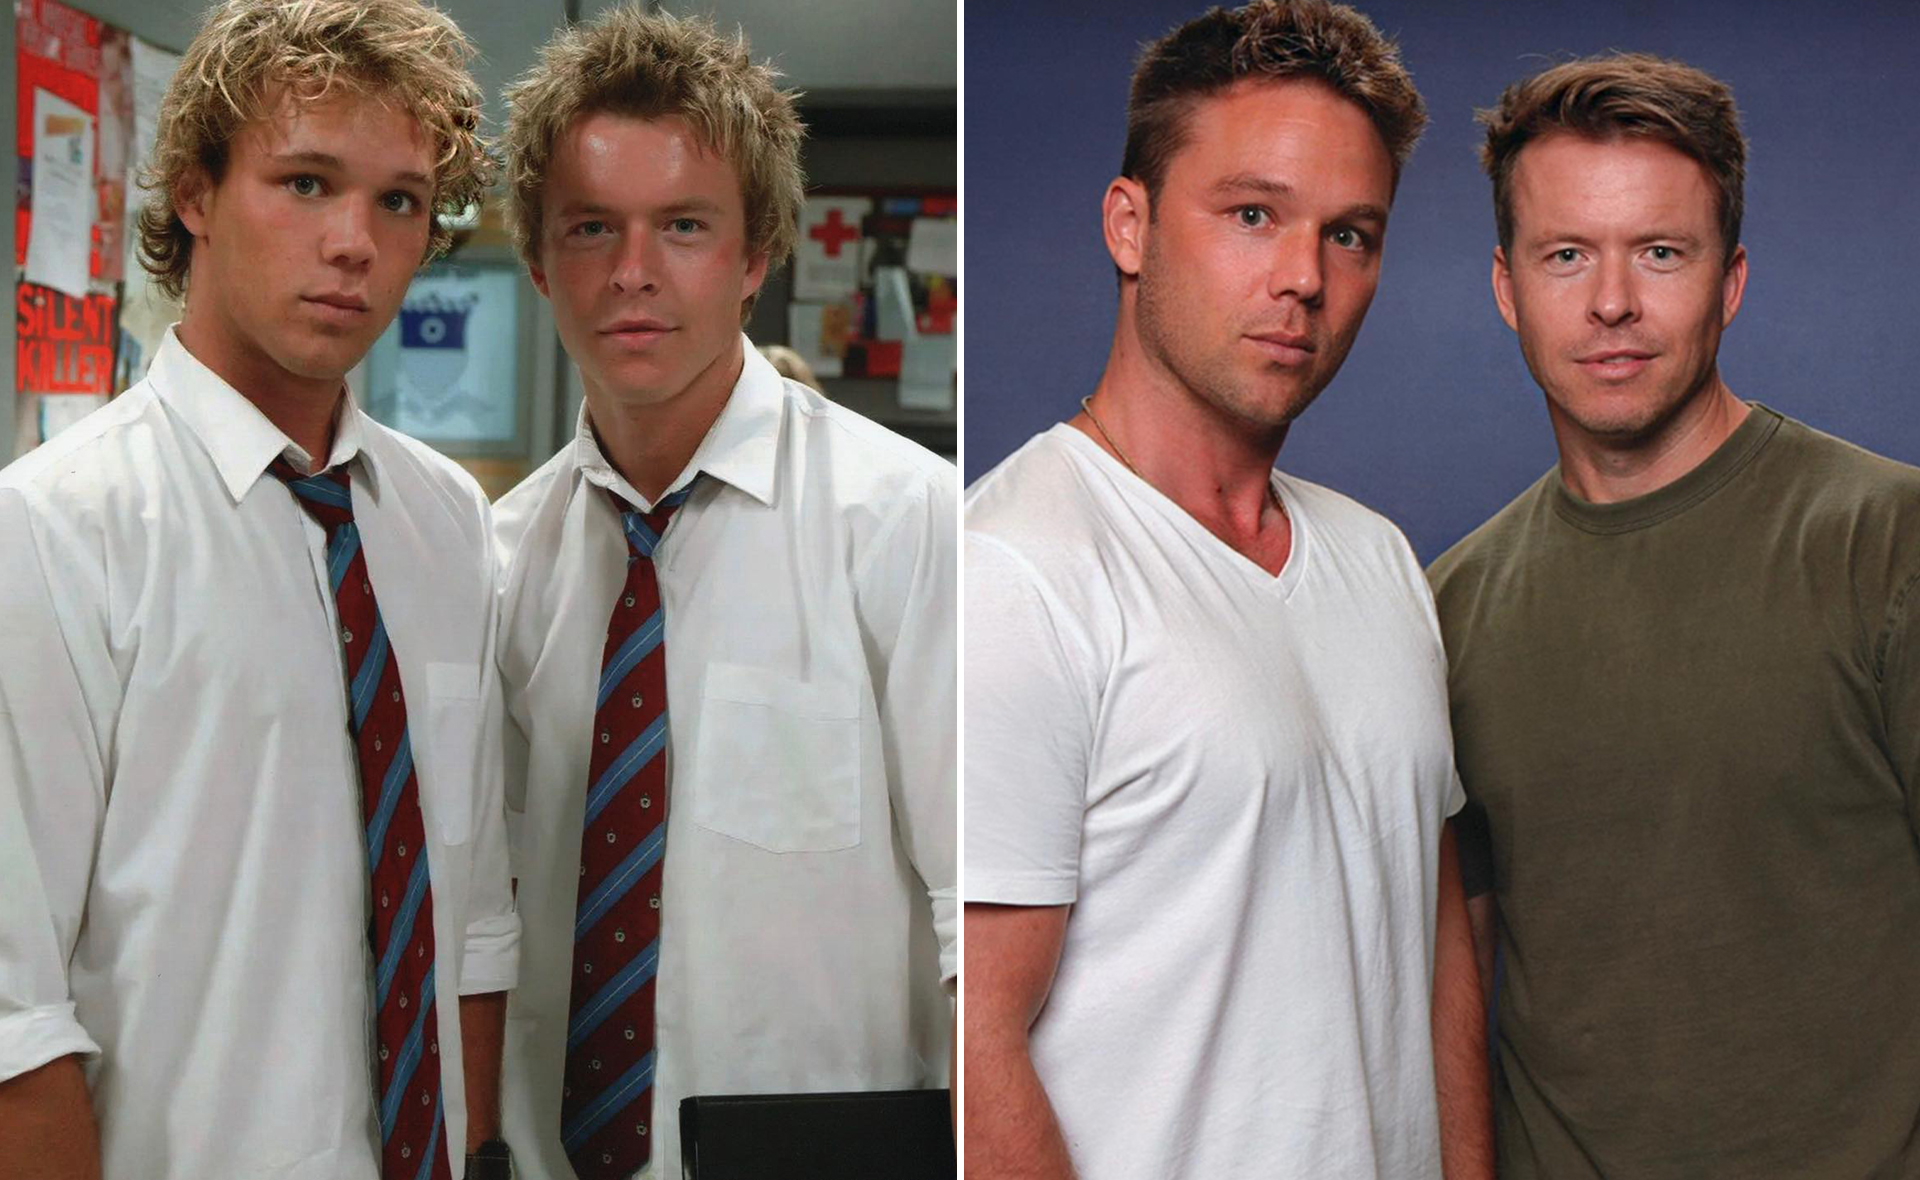 Lincoln Lewis and Todd Lasance celebrate 15 years since joining Home and Away – and their “bromance” gives us serious nostalgia